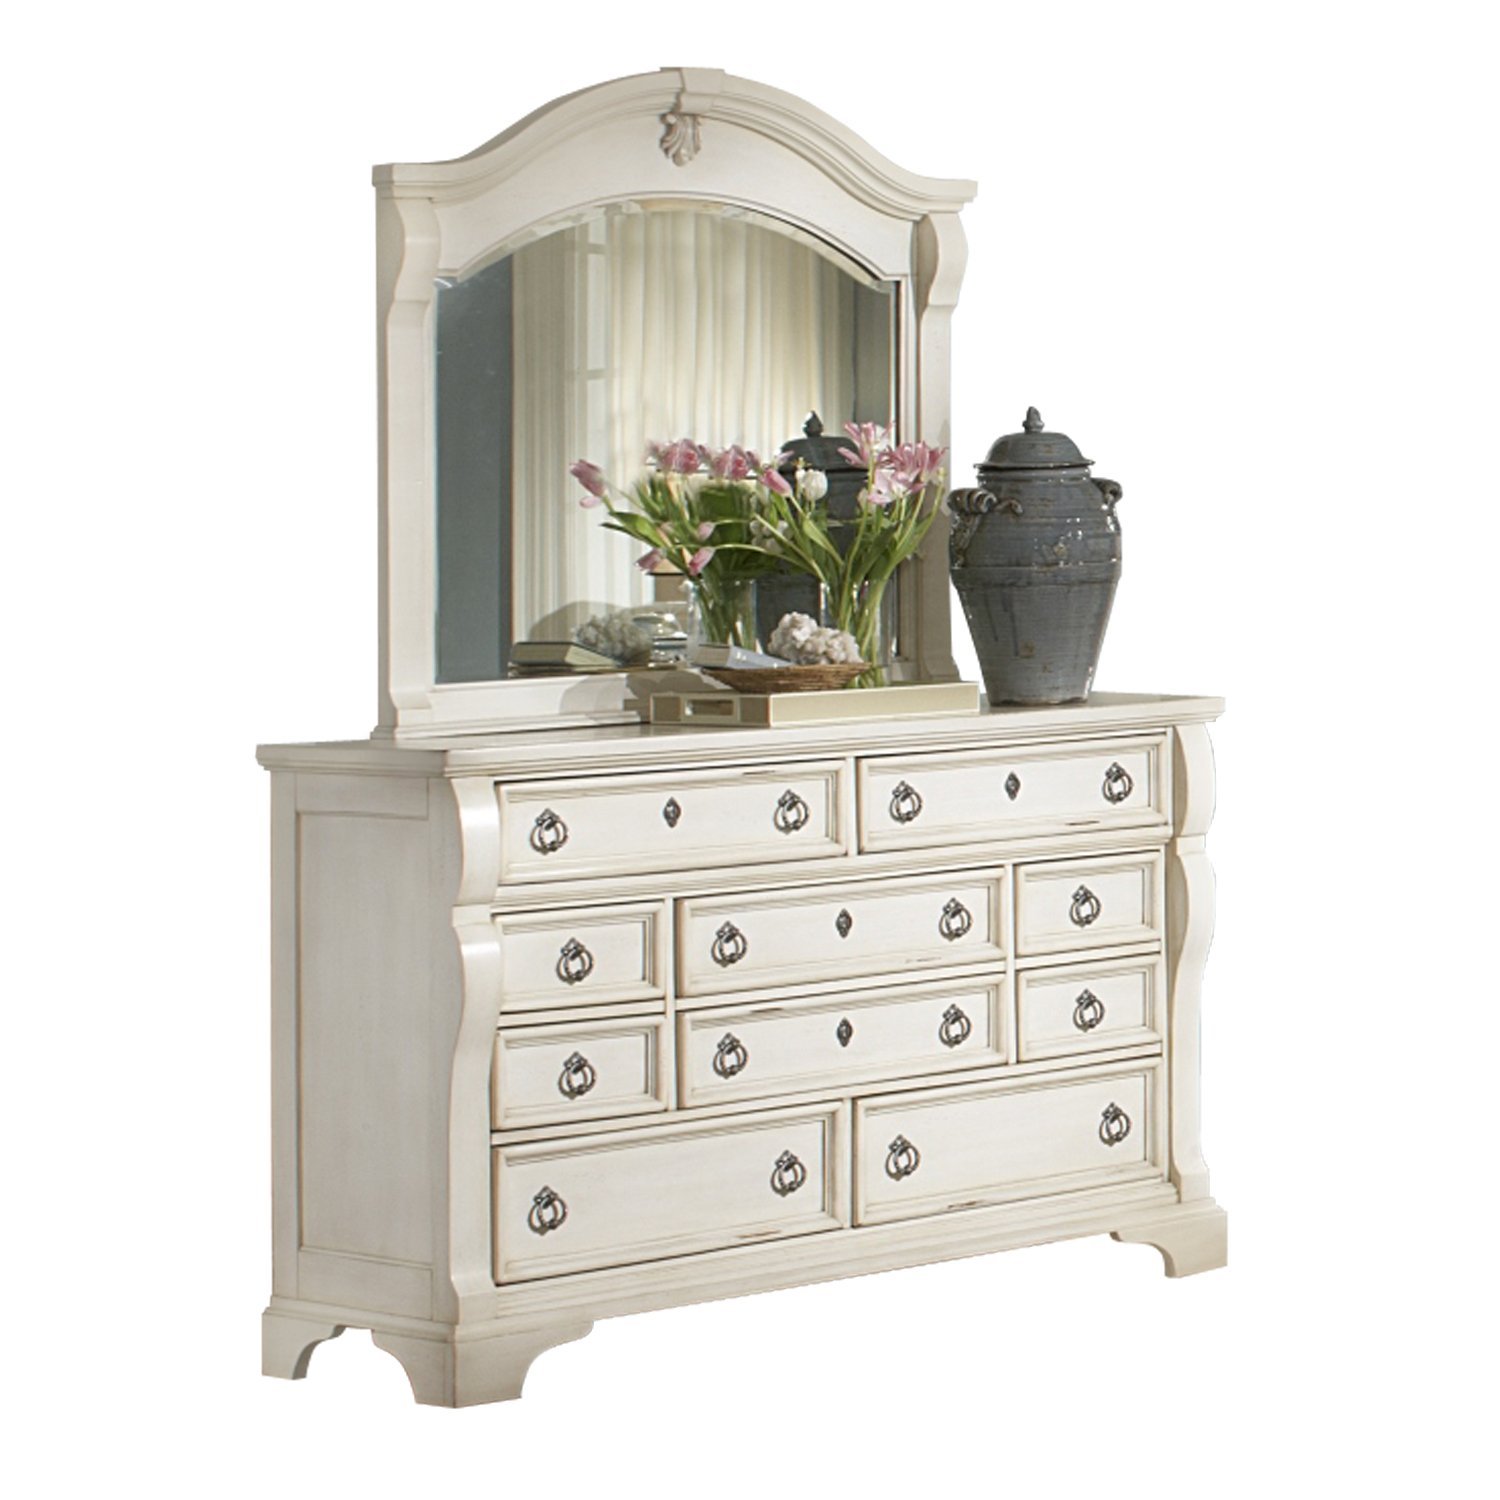 American Woodcrafters Heirloom Black Dresser and Mirror Combo, Antique White